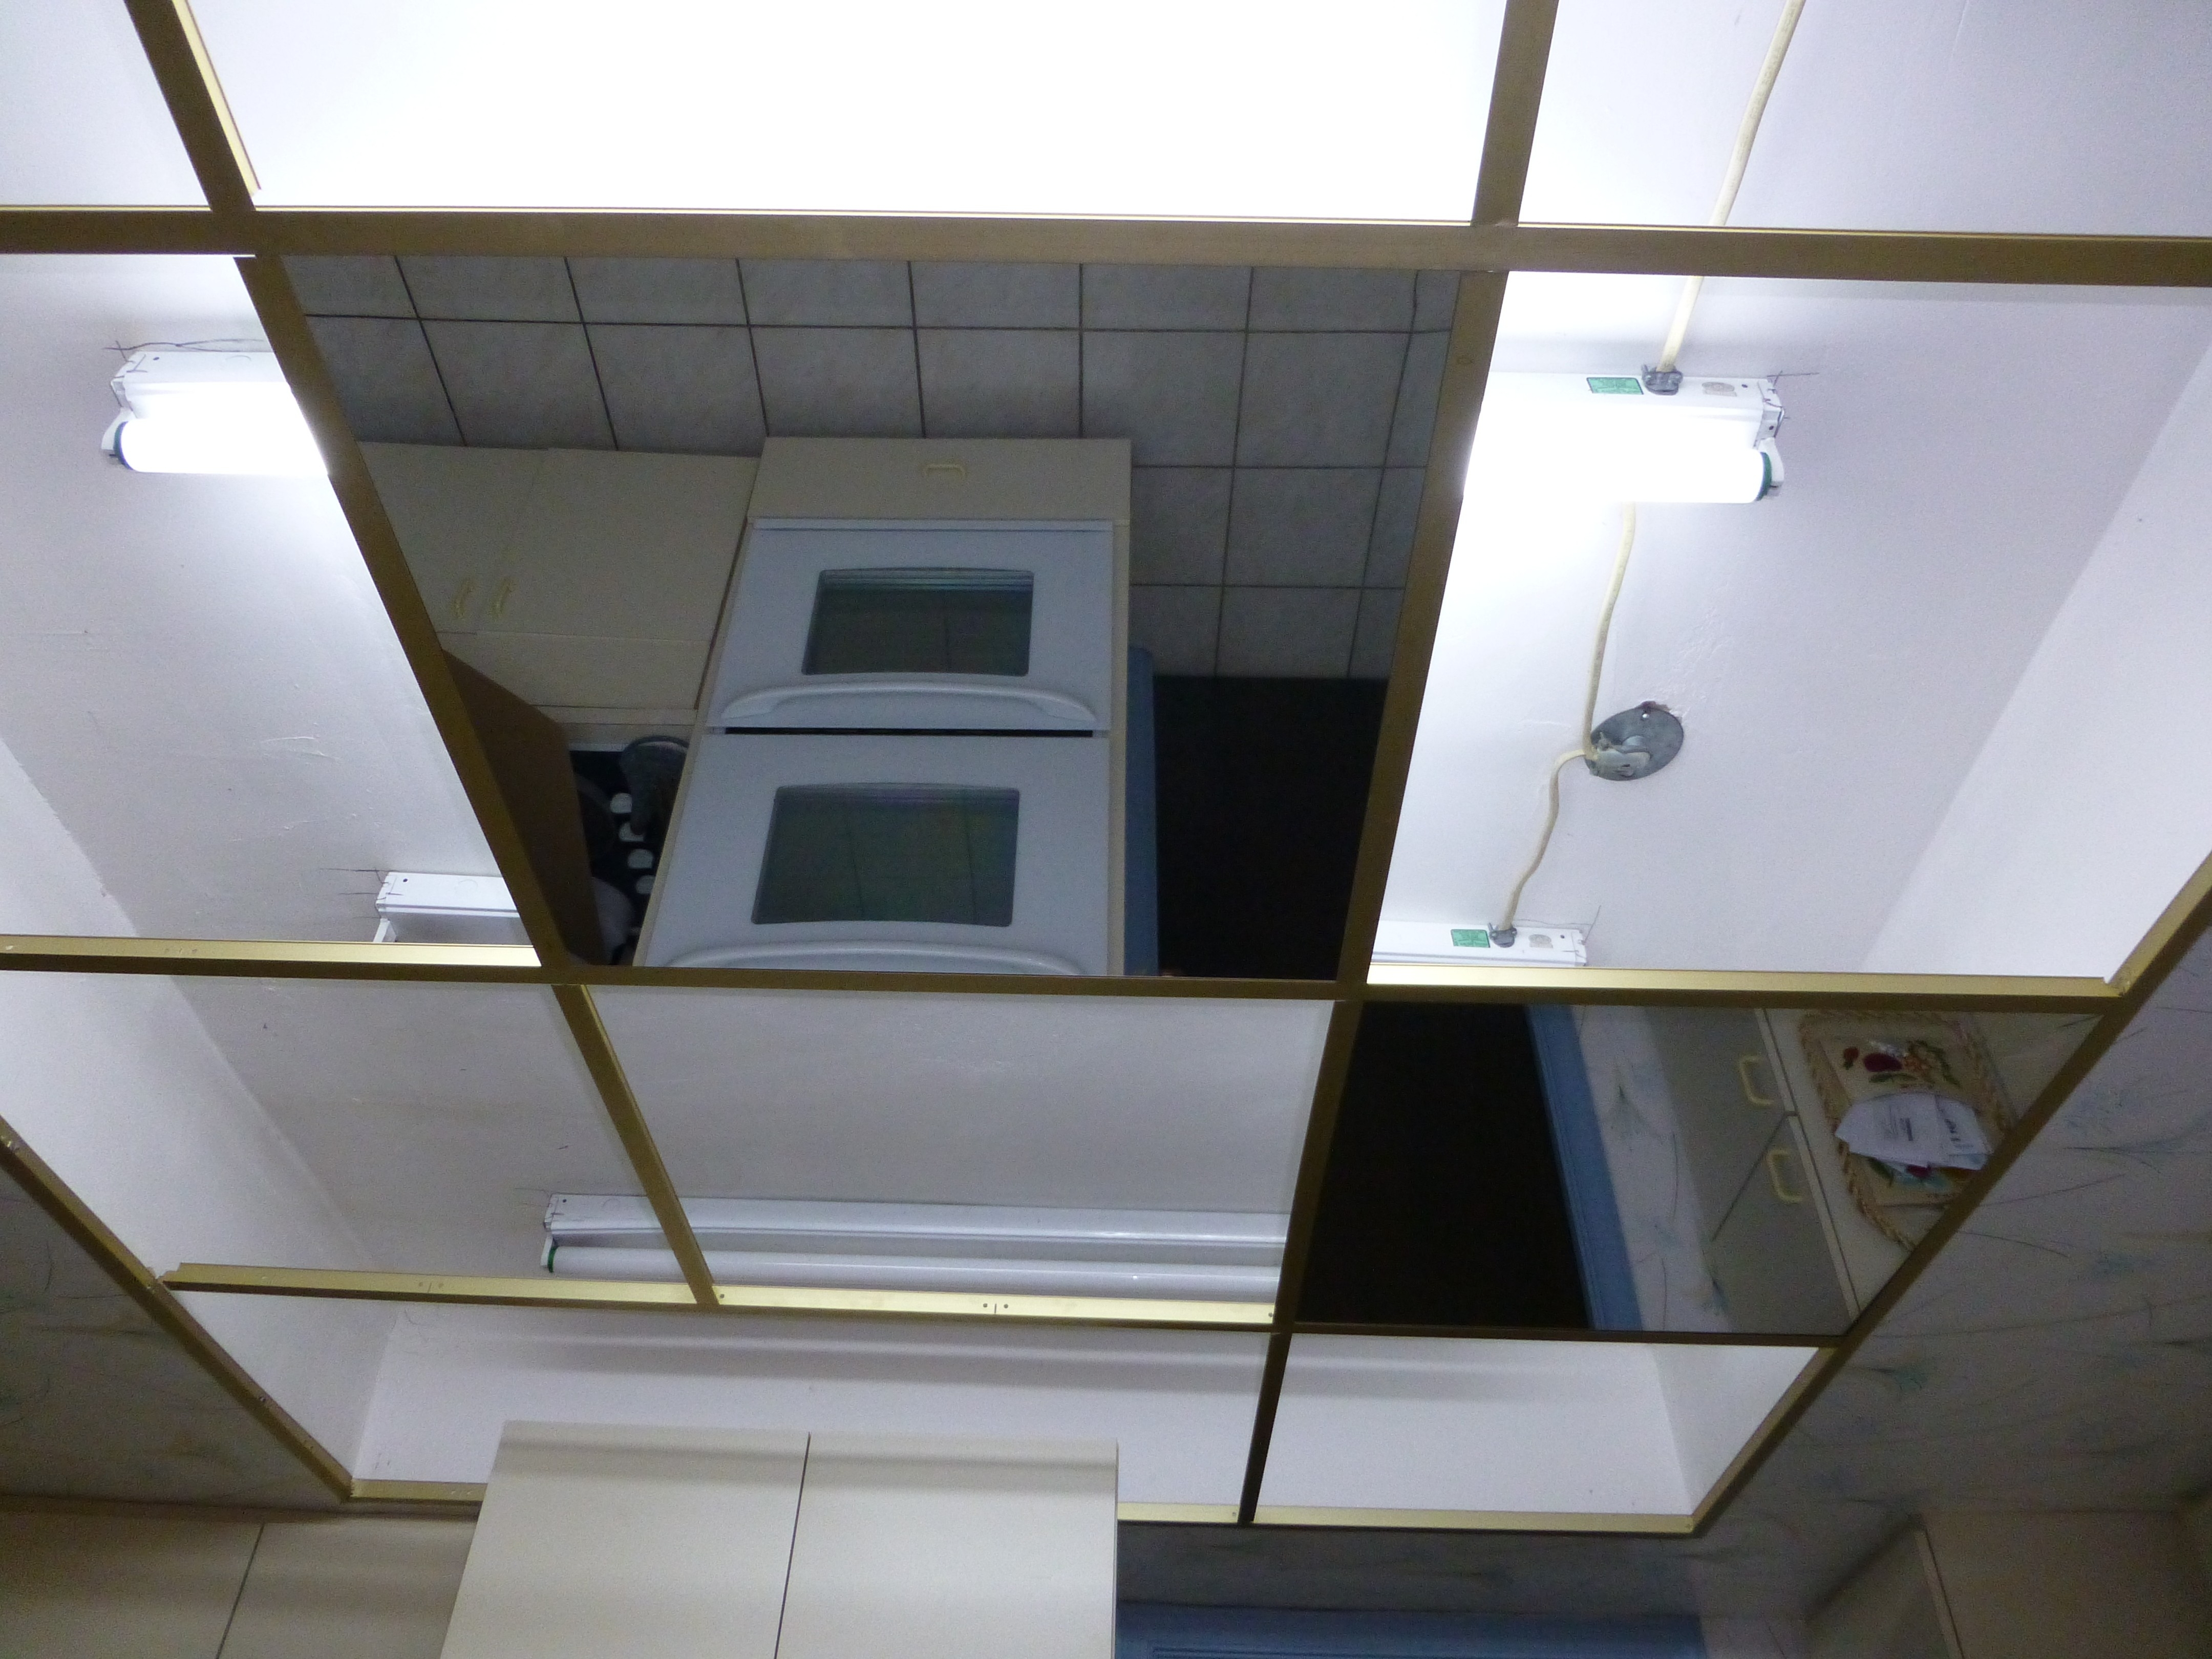 Suspended Ceiling Mirror Tiles Suspended Ceiling Mirror Tiles drop ceiling mirror panels pranksenders 4320 X 3240